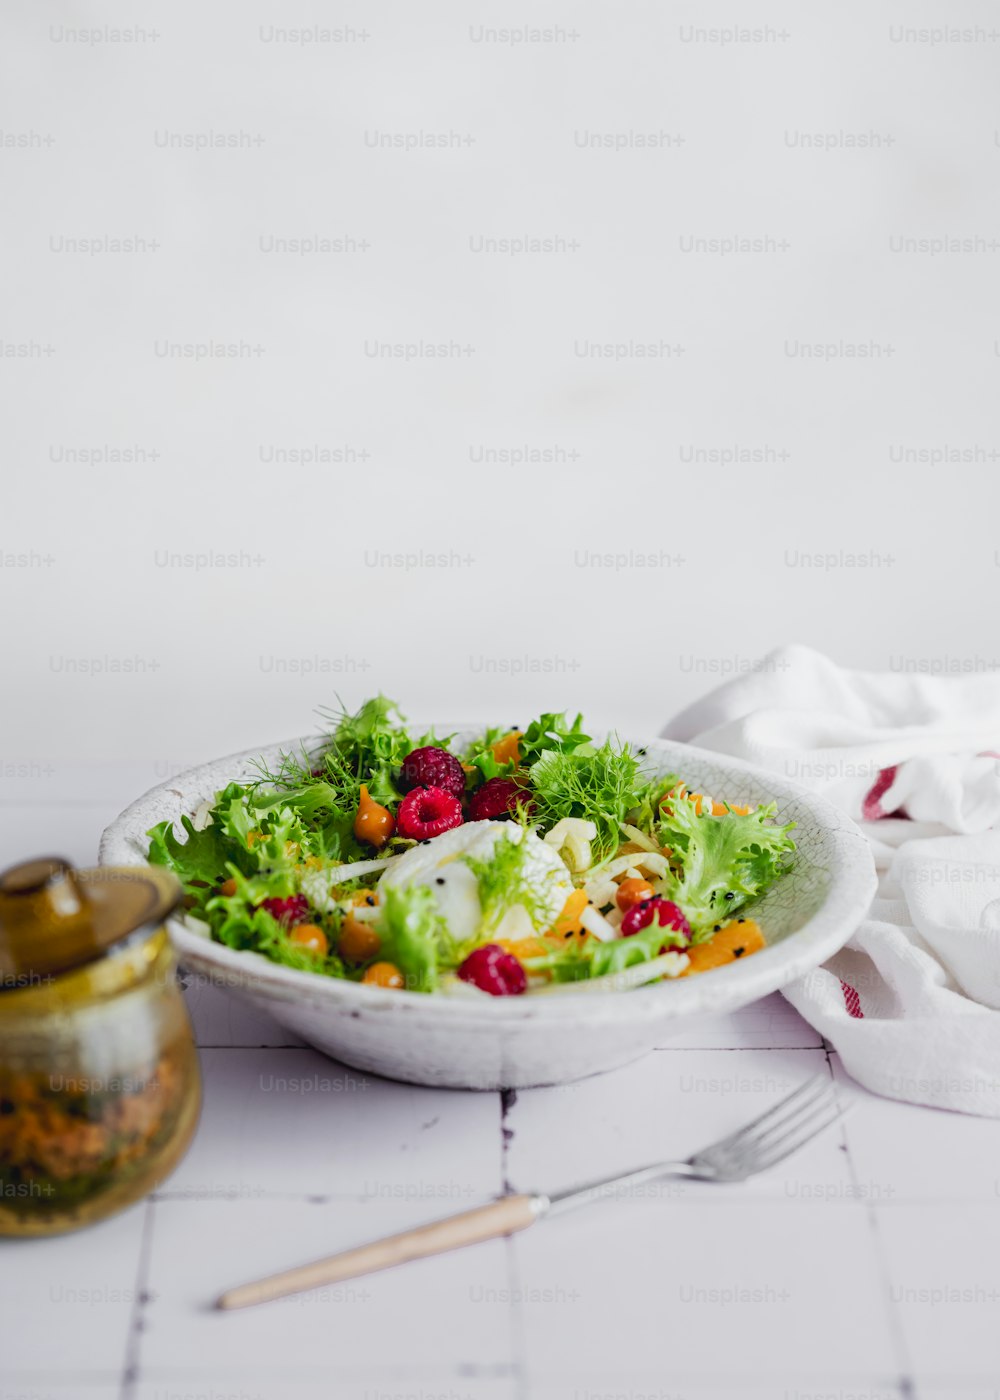 a white bowl filled with a salad next to a fork